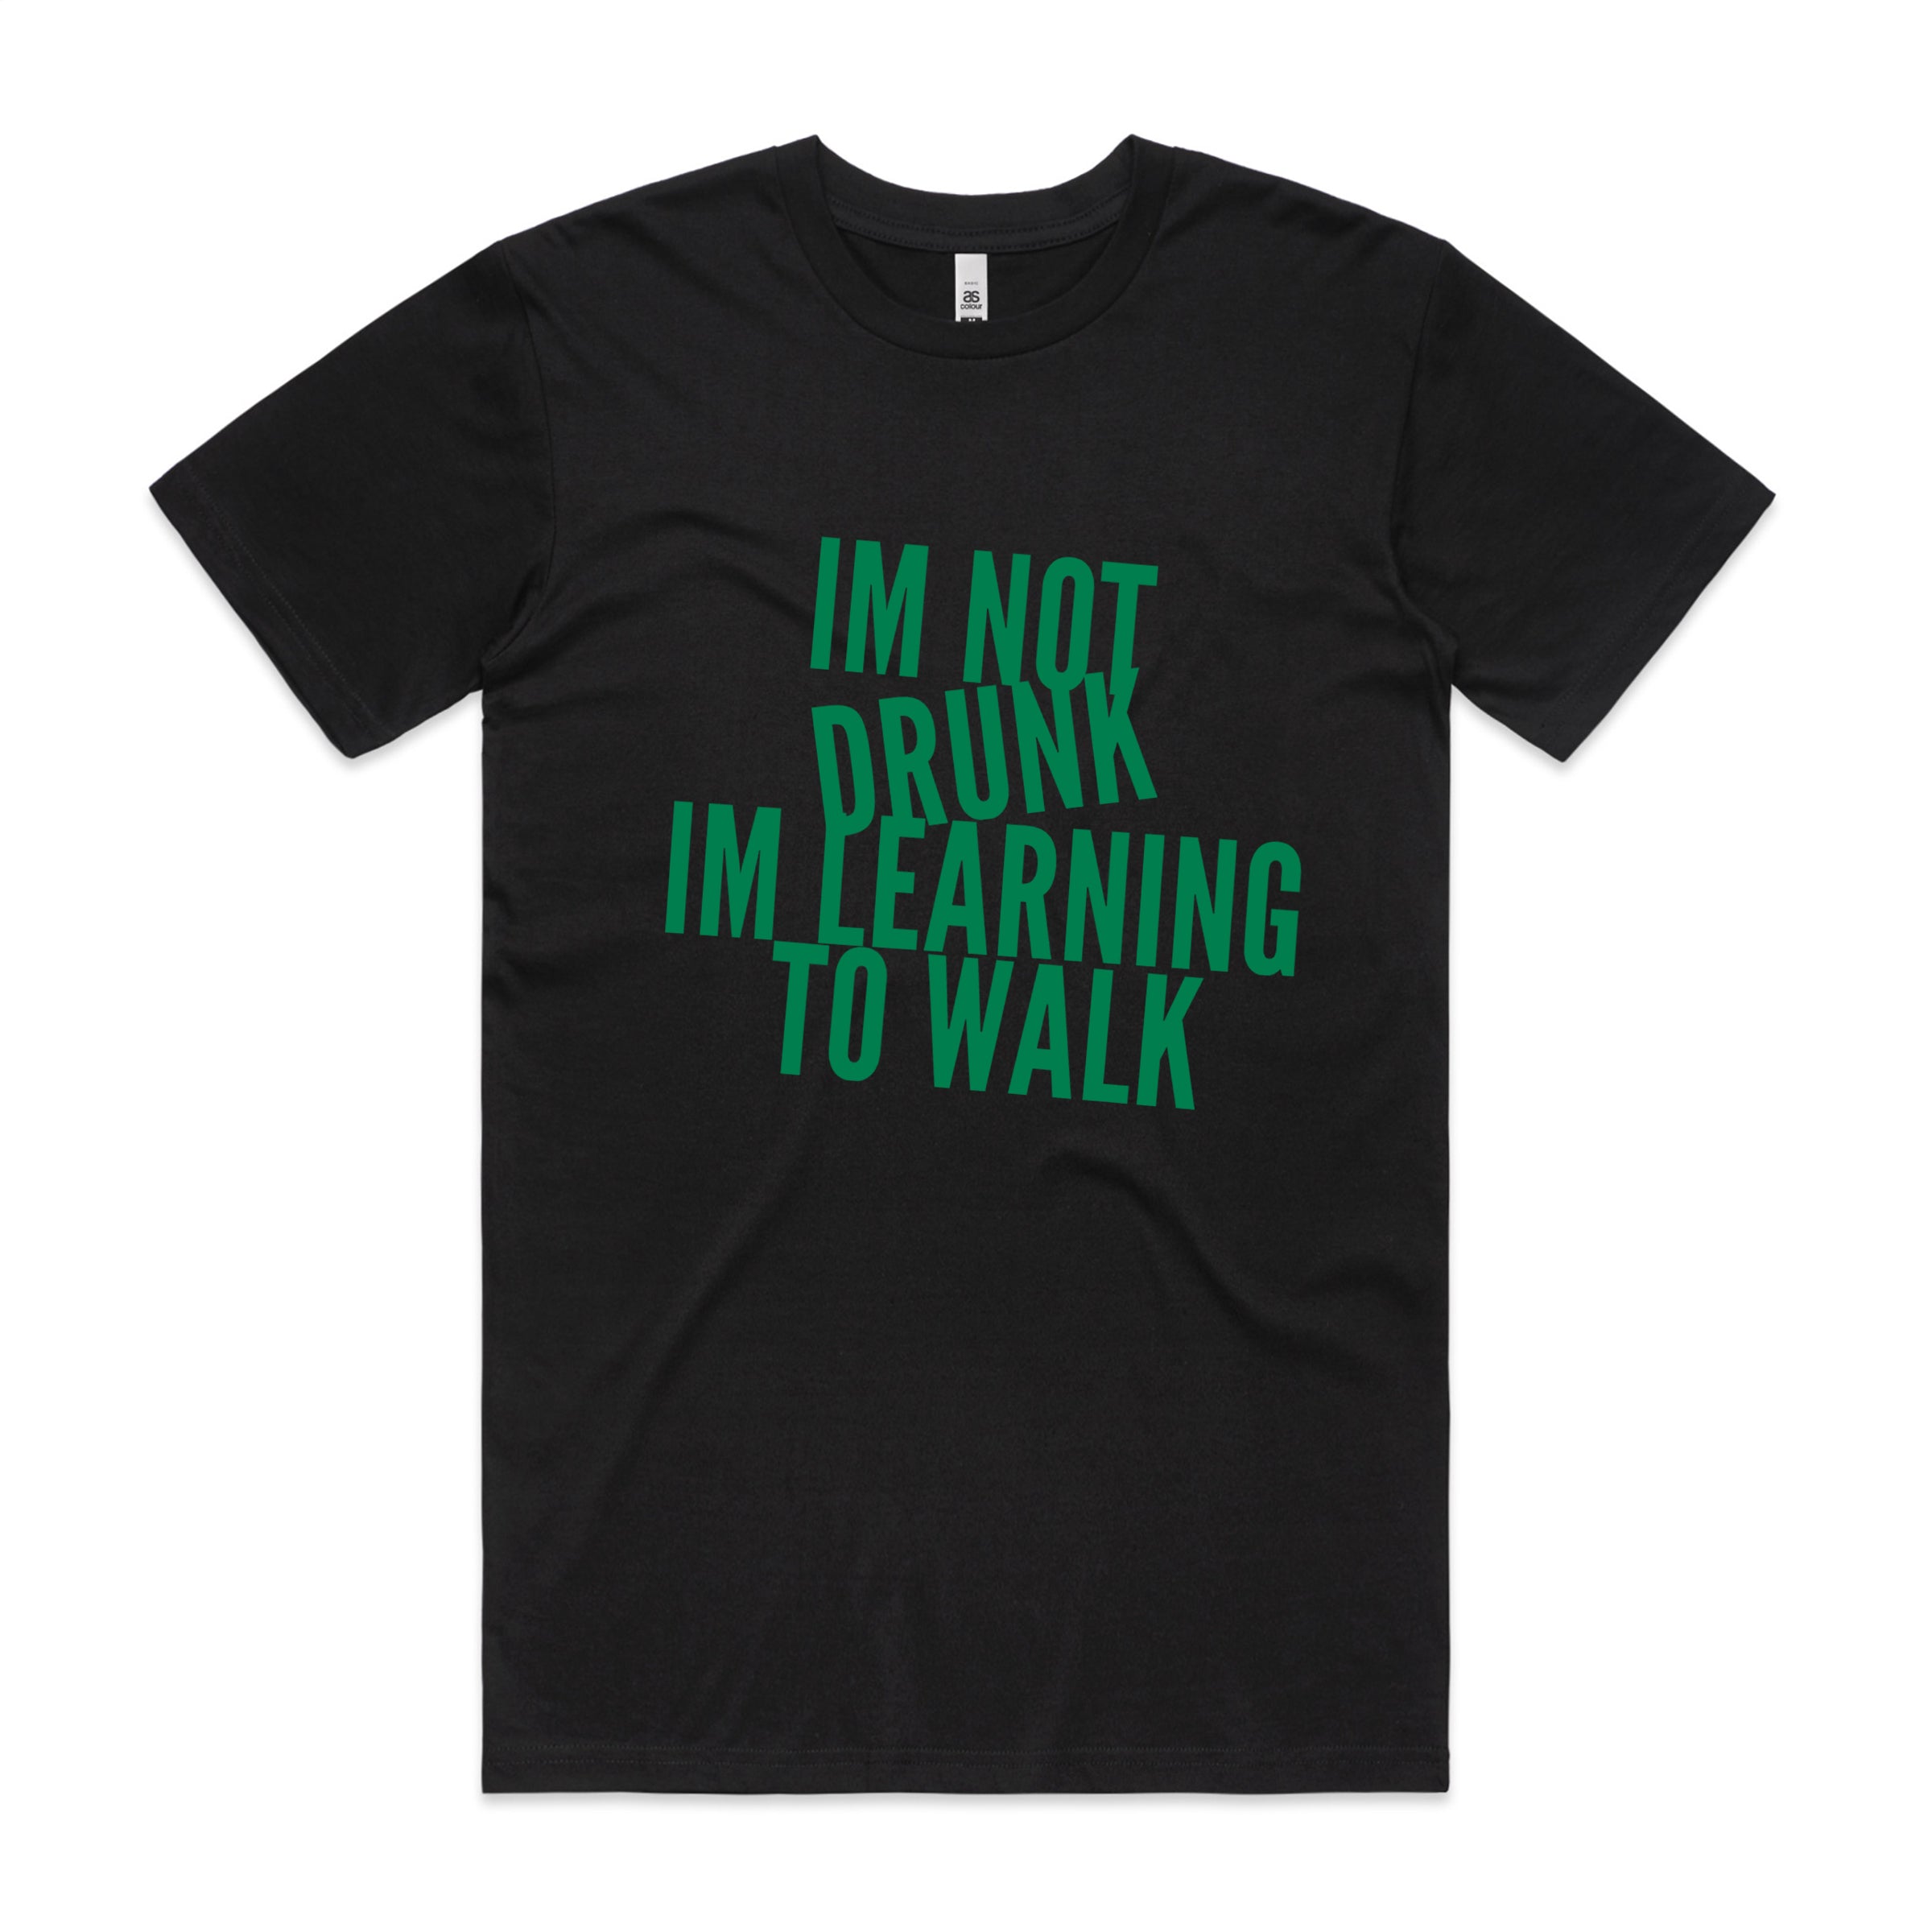 I'M NOT DRUNK I'M LEARNING TO WALK TSHIRT